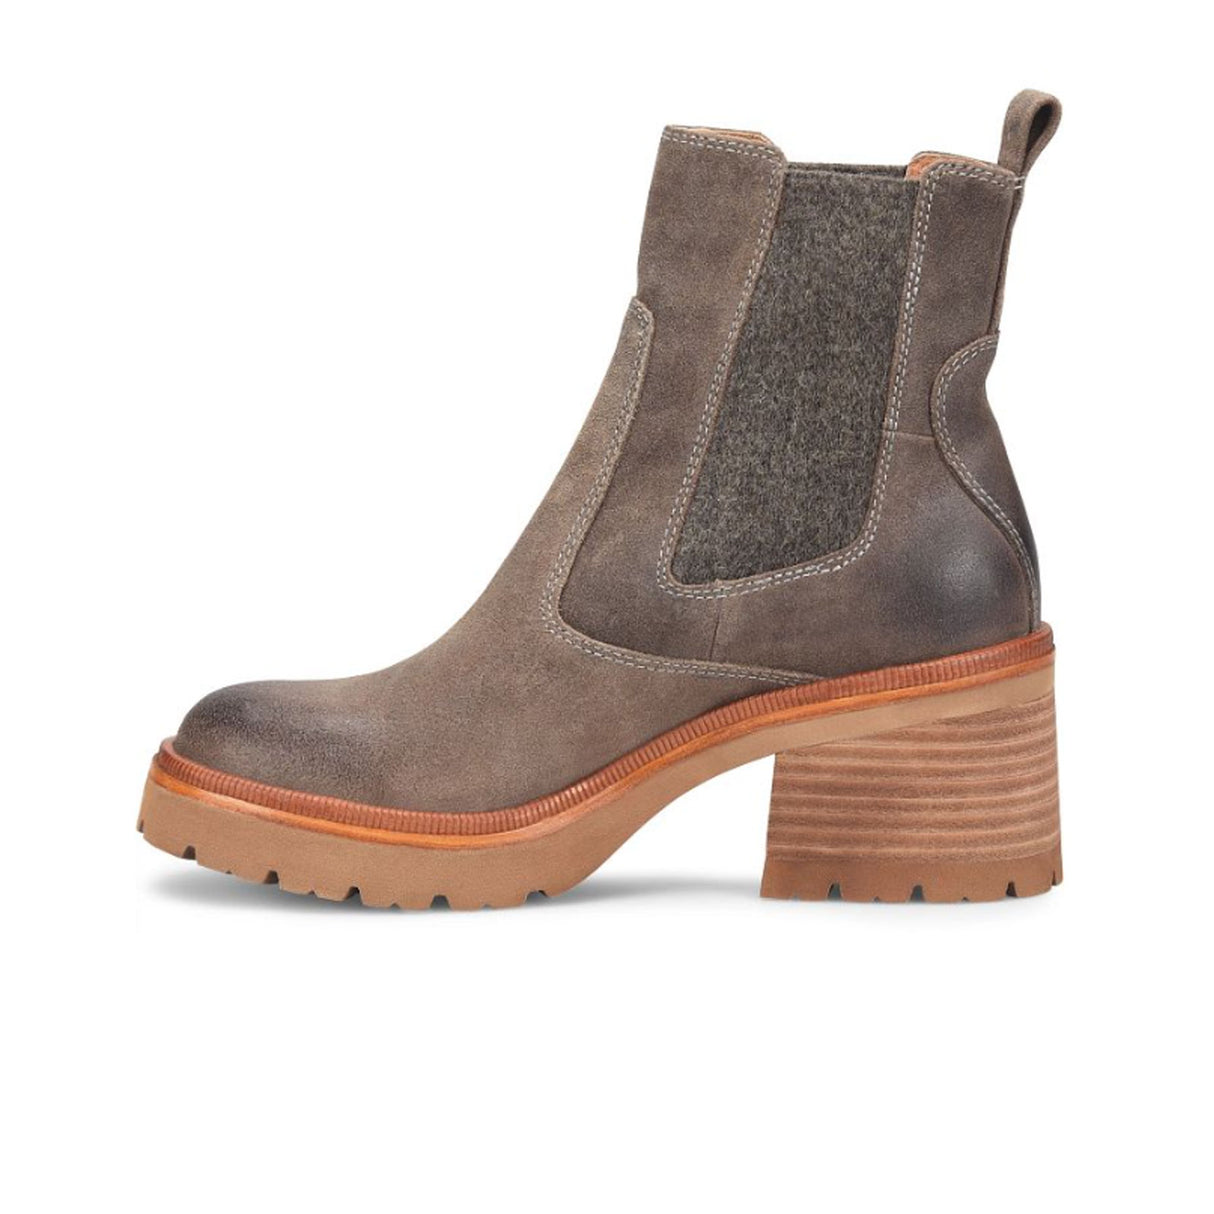 Sofft Jordie Chelsea Boot (Women) - Mushroom Boots - Fashion - Chelsea Boot - The Heel Shoe Fitters